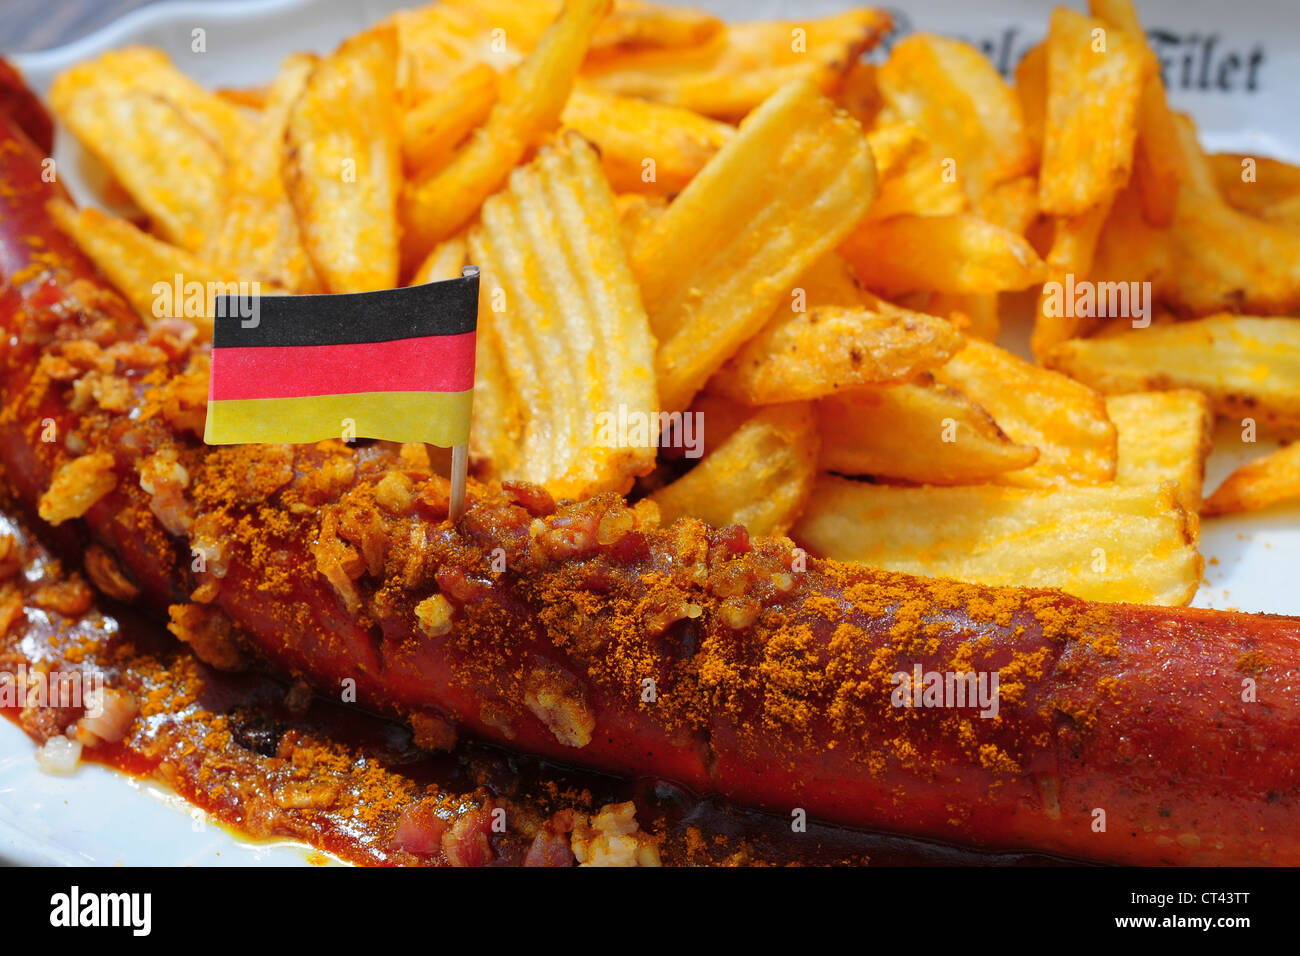 The dish 'currywurst' at a restaurant in Germany Stock Photo